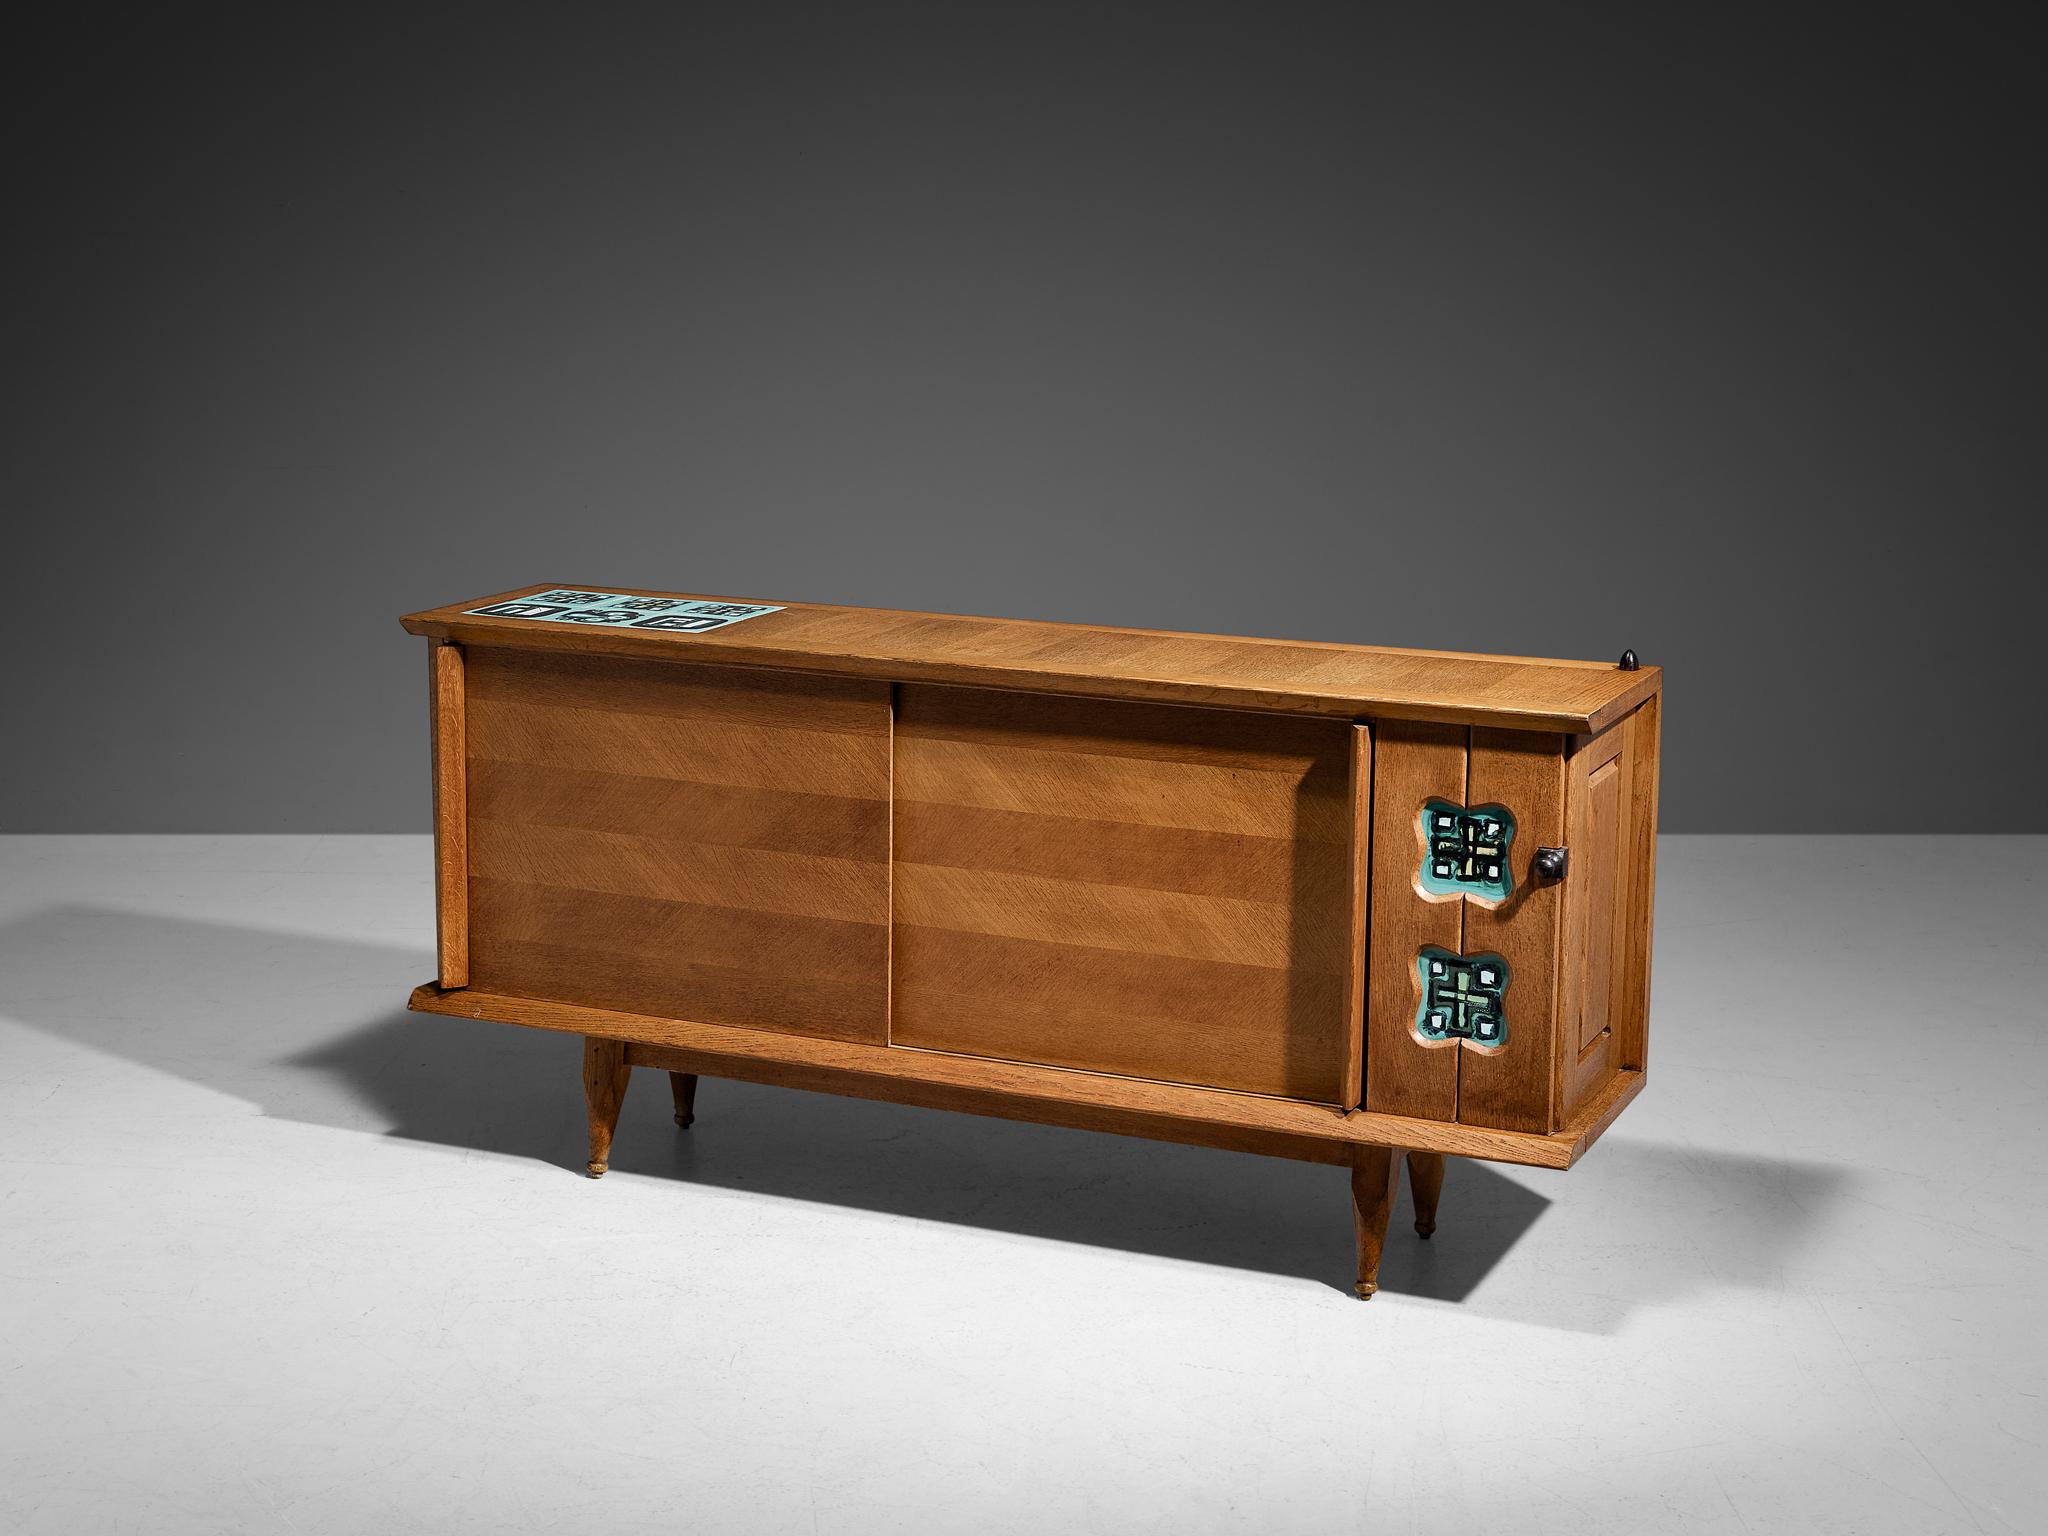 Guillerme et Chambron for Votre Maison, sideboard, oak, oak veneer, ceramic tiles, France, 1960s

This sideboard holds all the characteristics of the French designer duo Jacques Chambron and Robert Guillerme. The front has two sliding doors executed